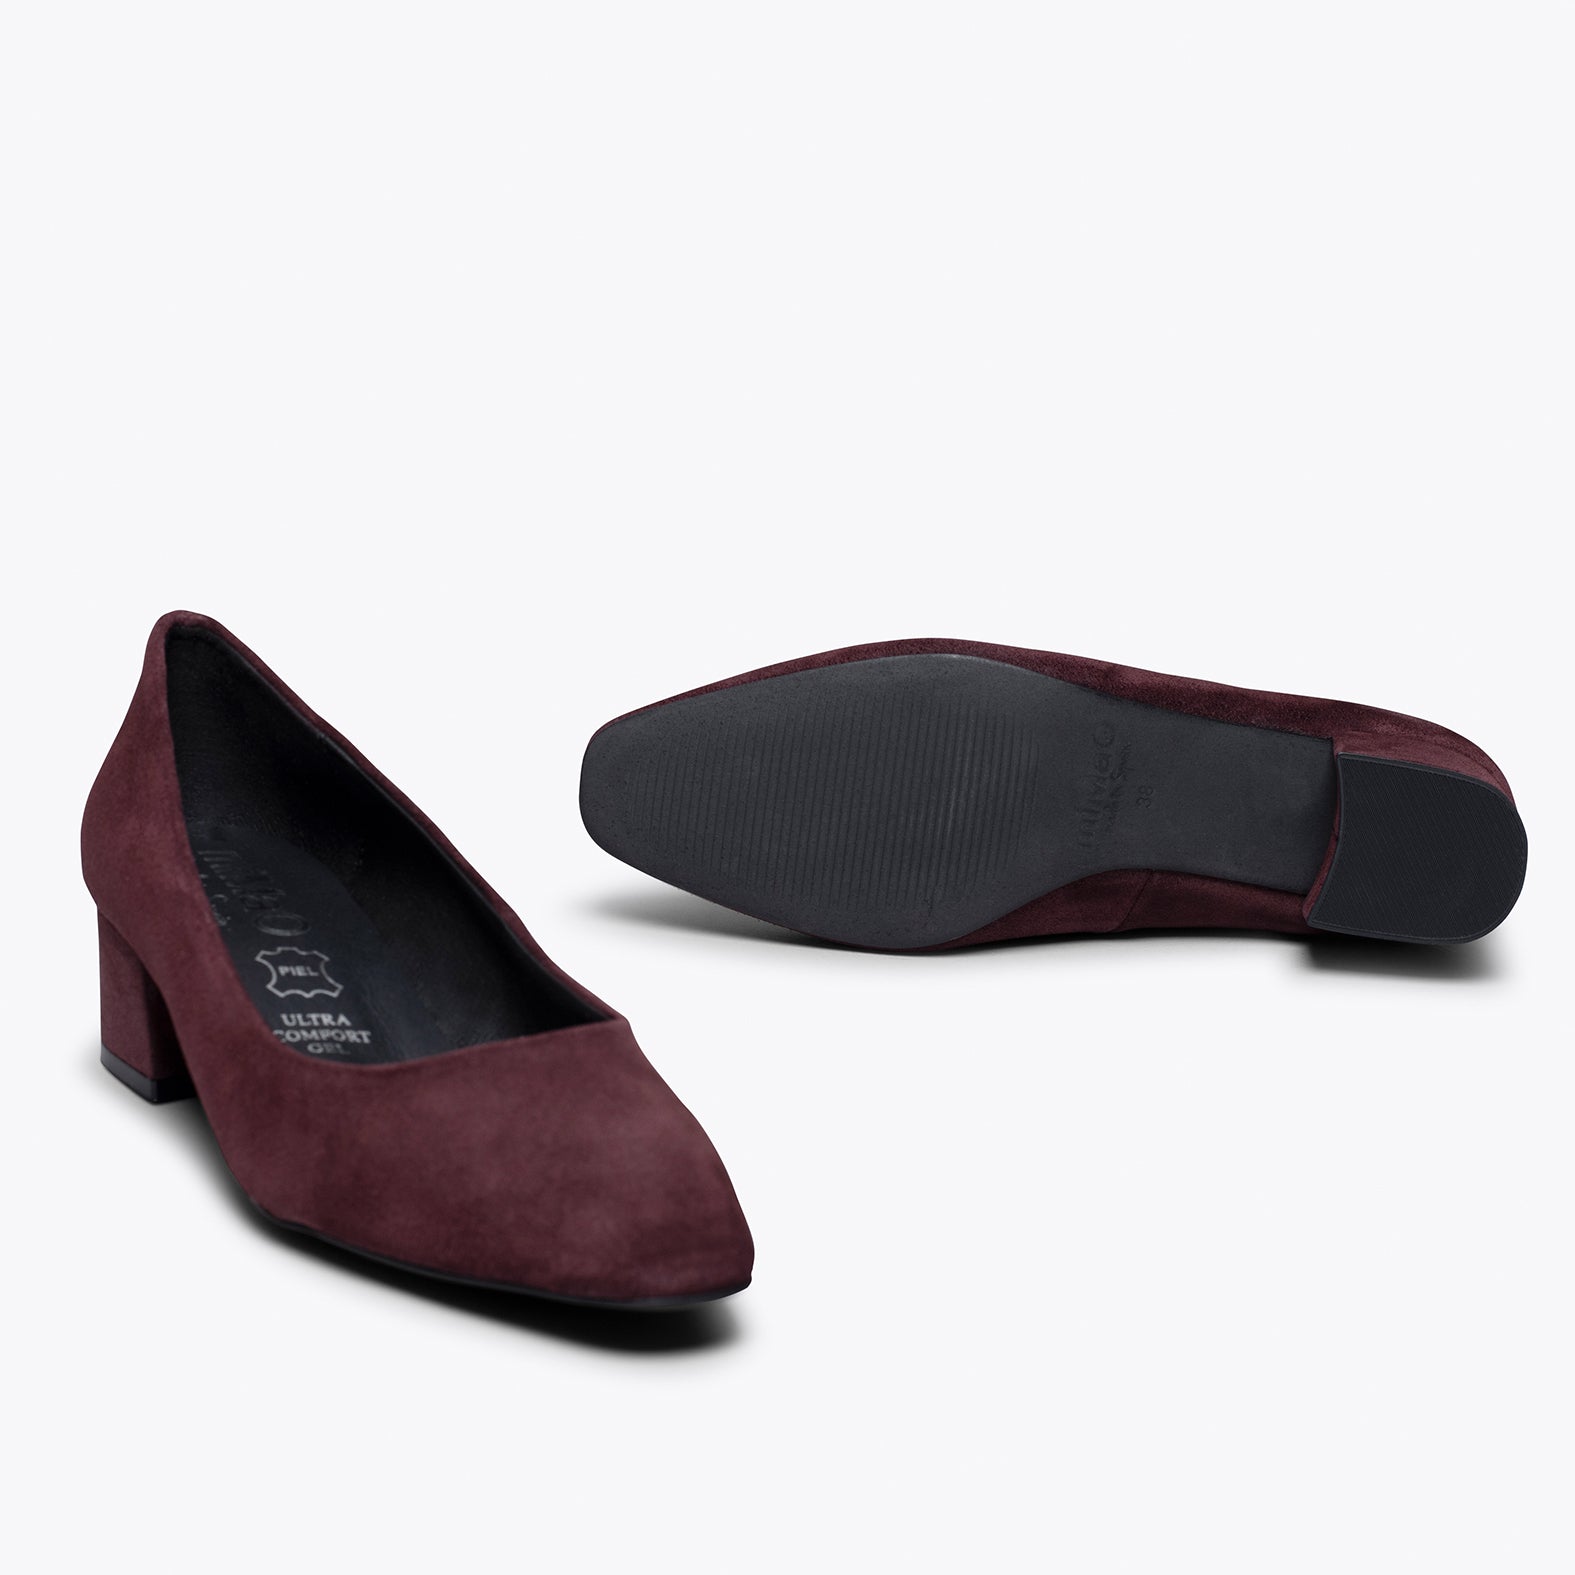 TREND – BURGUNDY square pointed mid heel